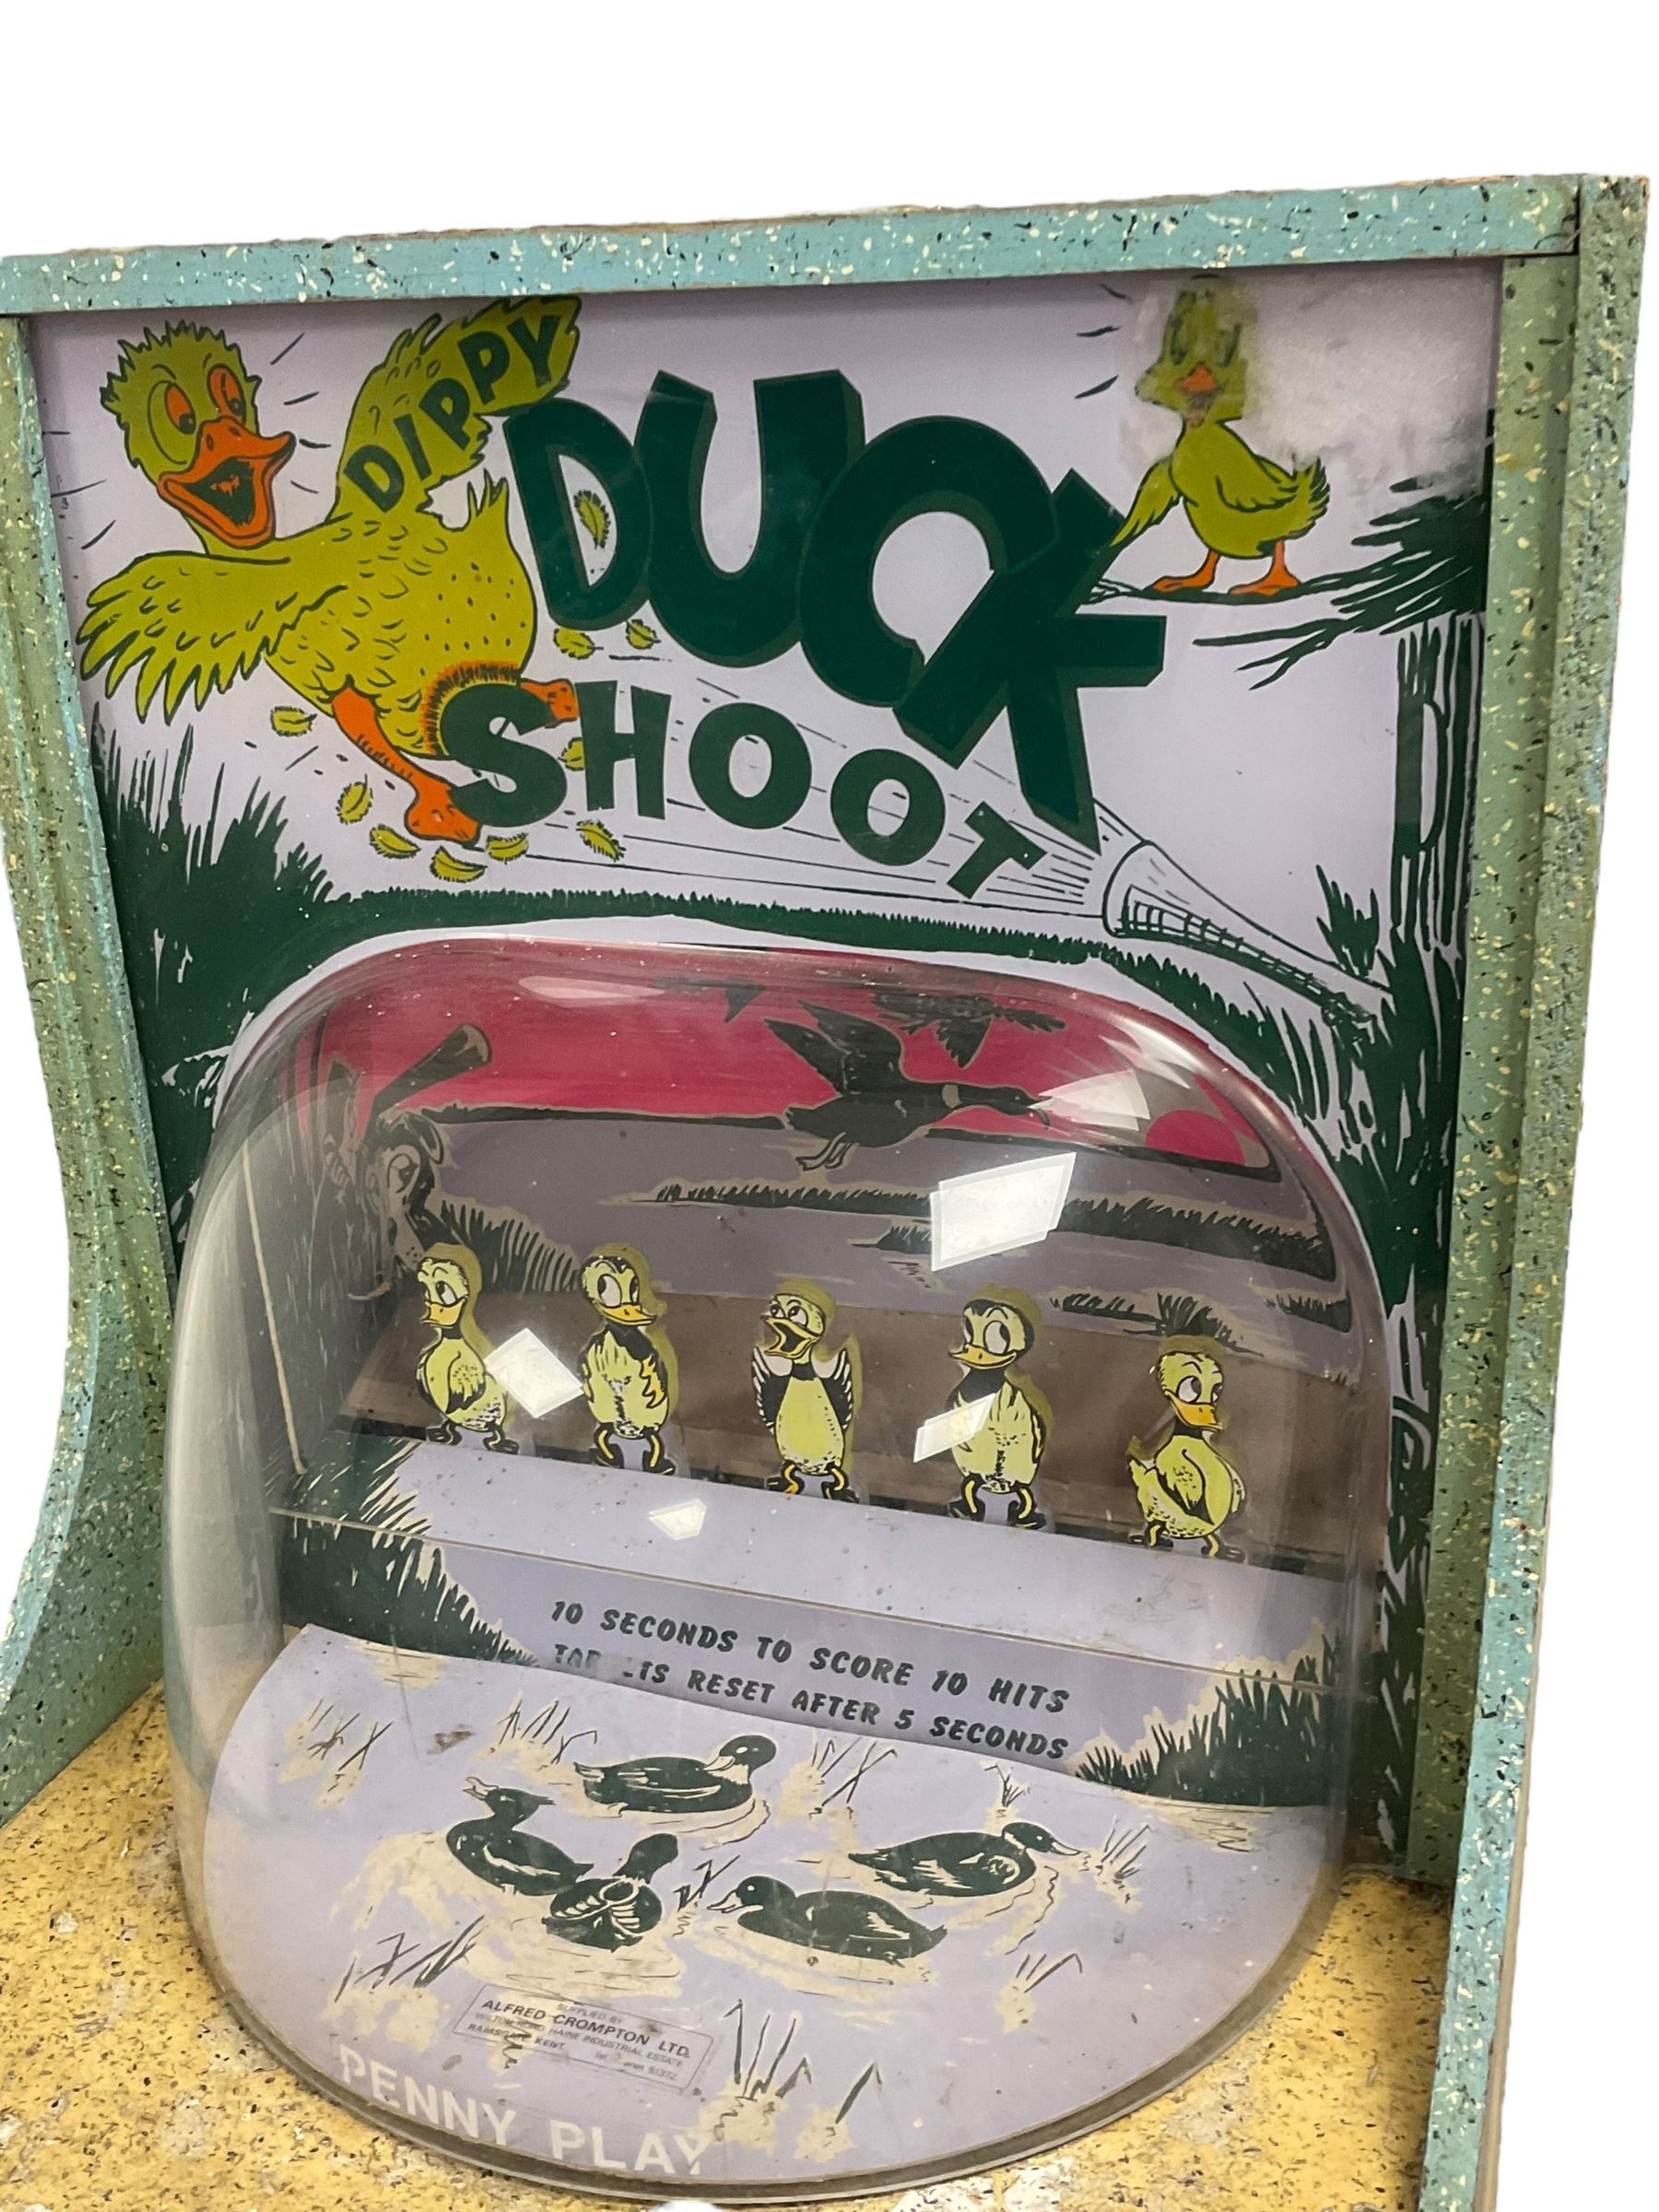 Early 1960s 'Dippy Duck Shoot' upright coin-operated arcade machine - Image 8 of 9